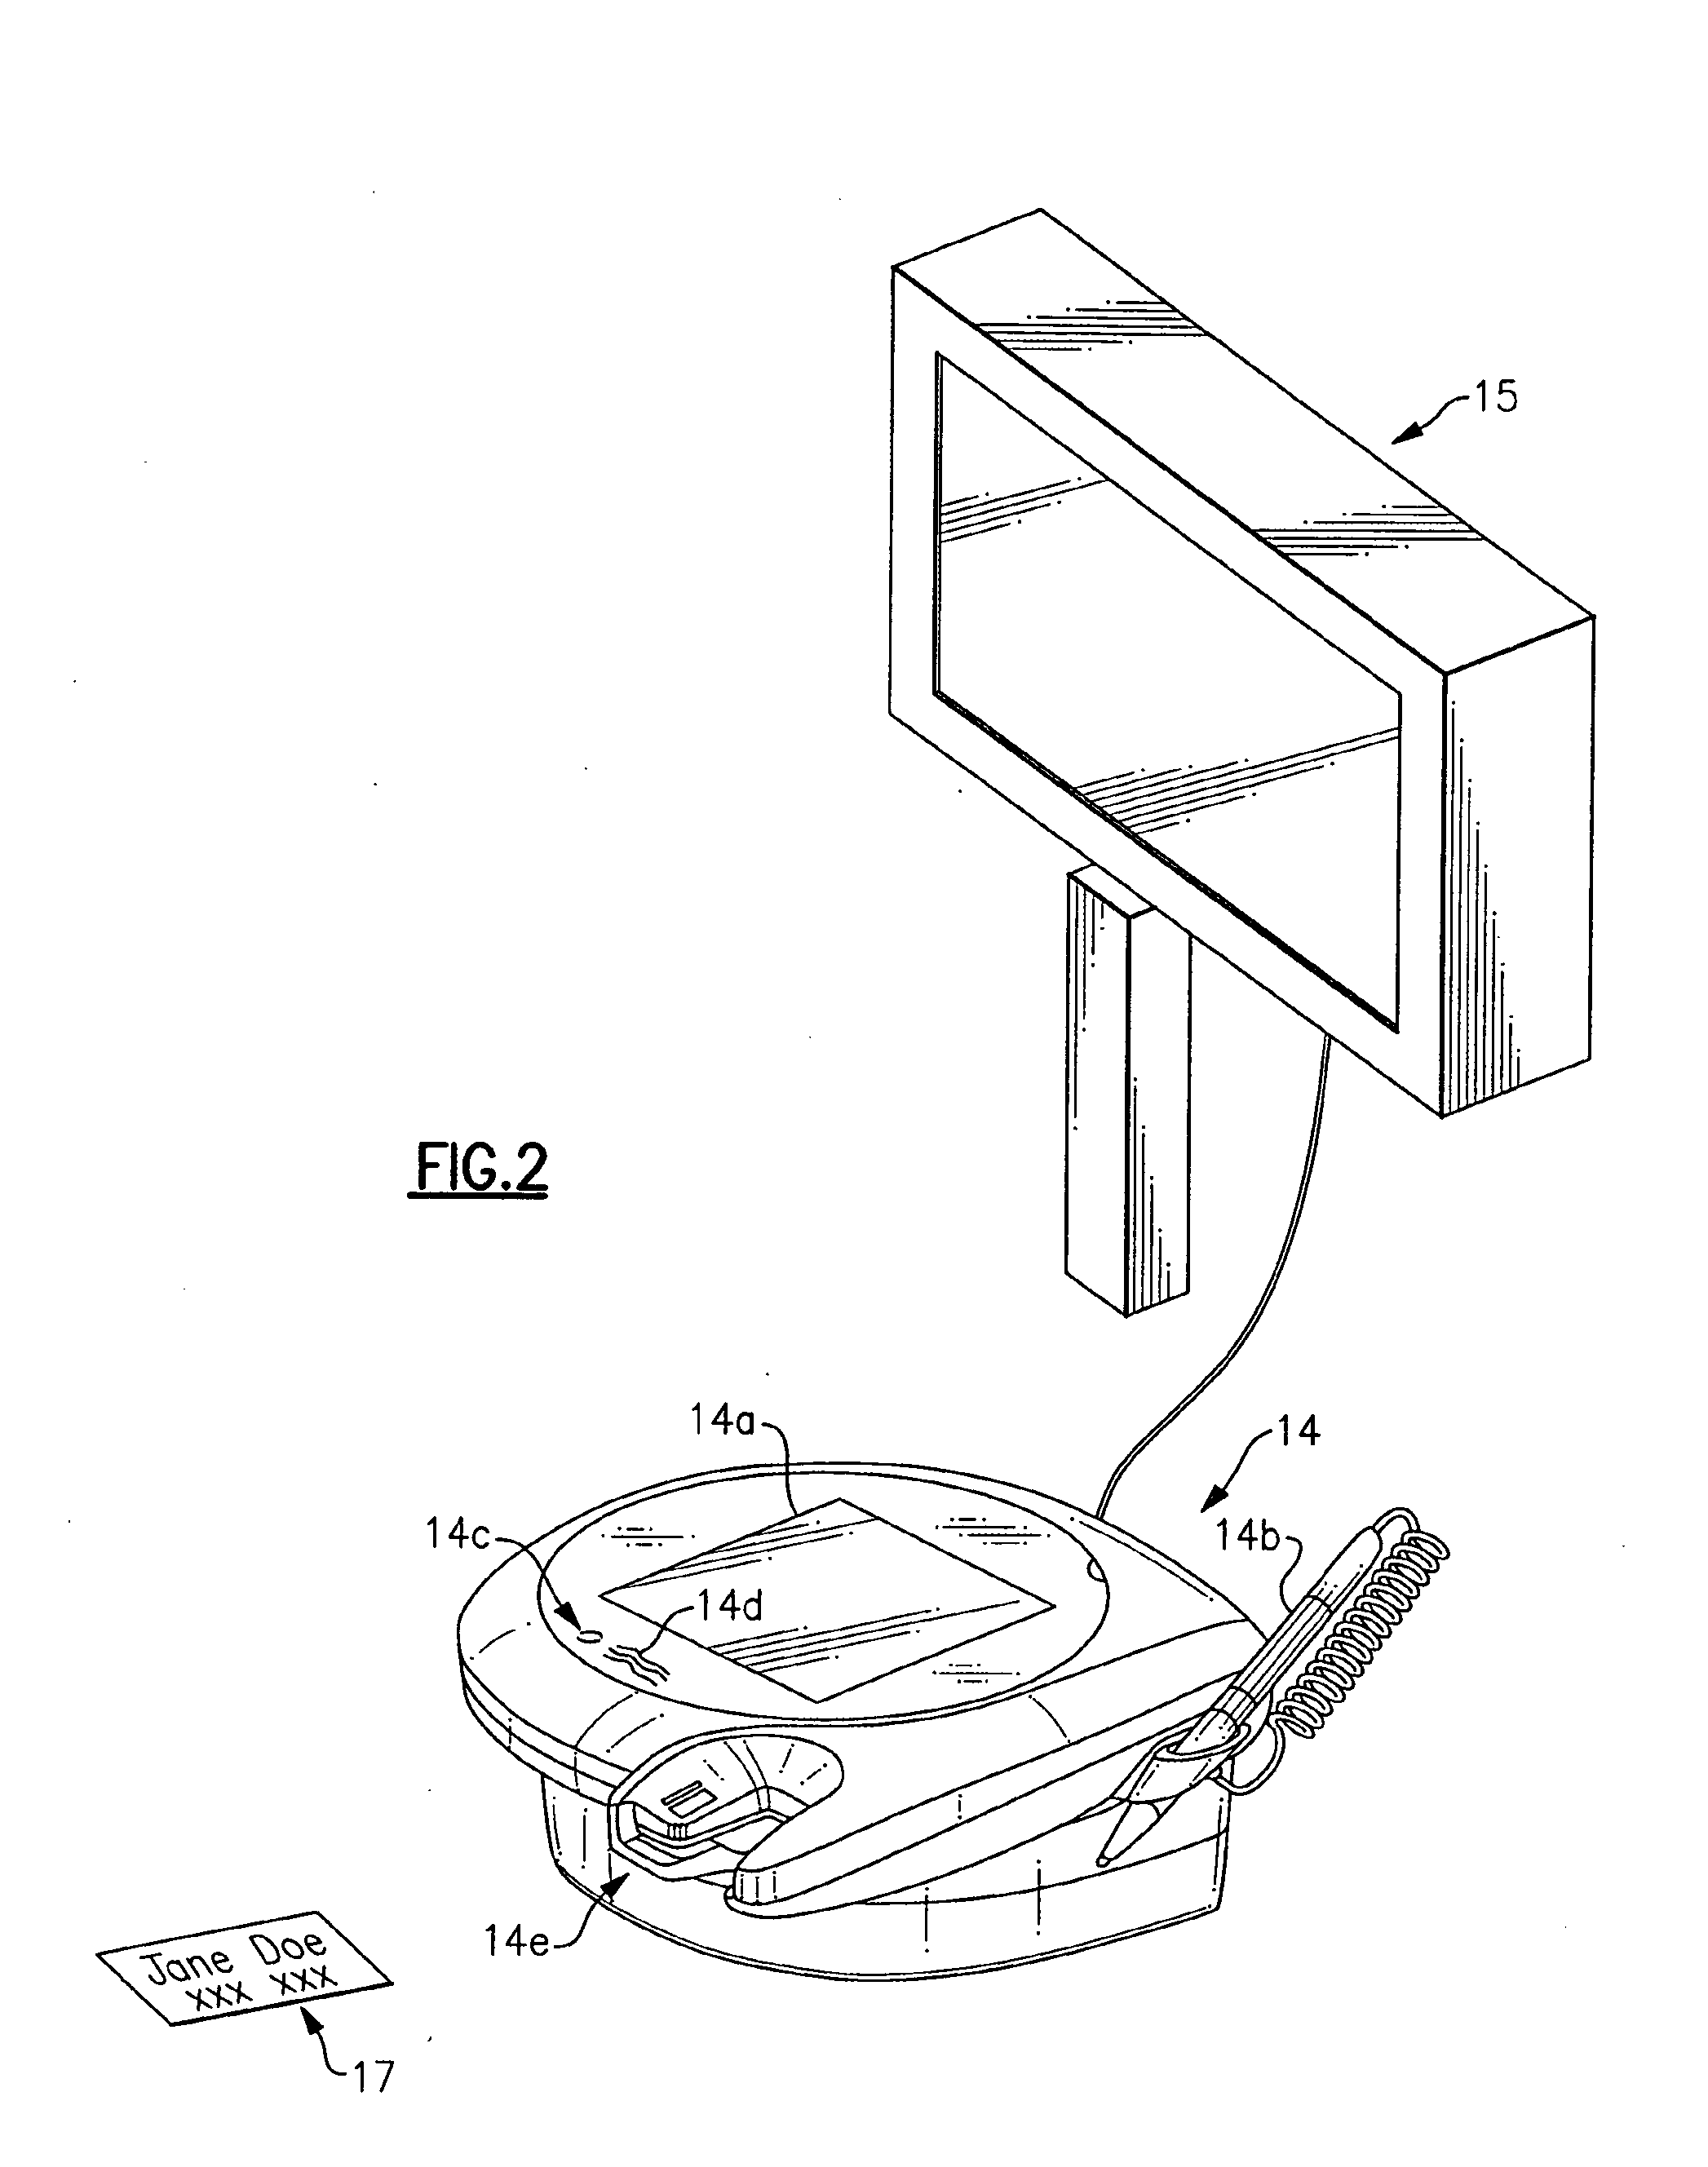 System and Method to Store and Retrieve Indentifier Associated Information Content